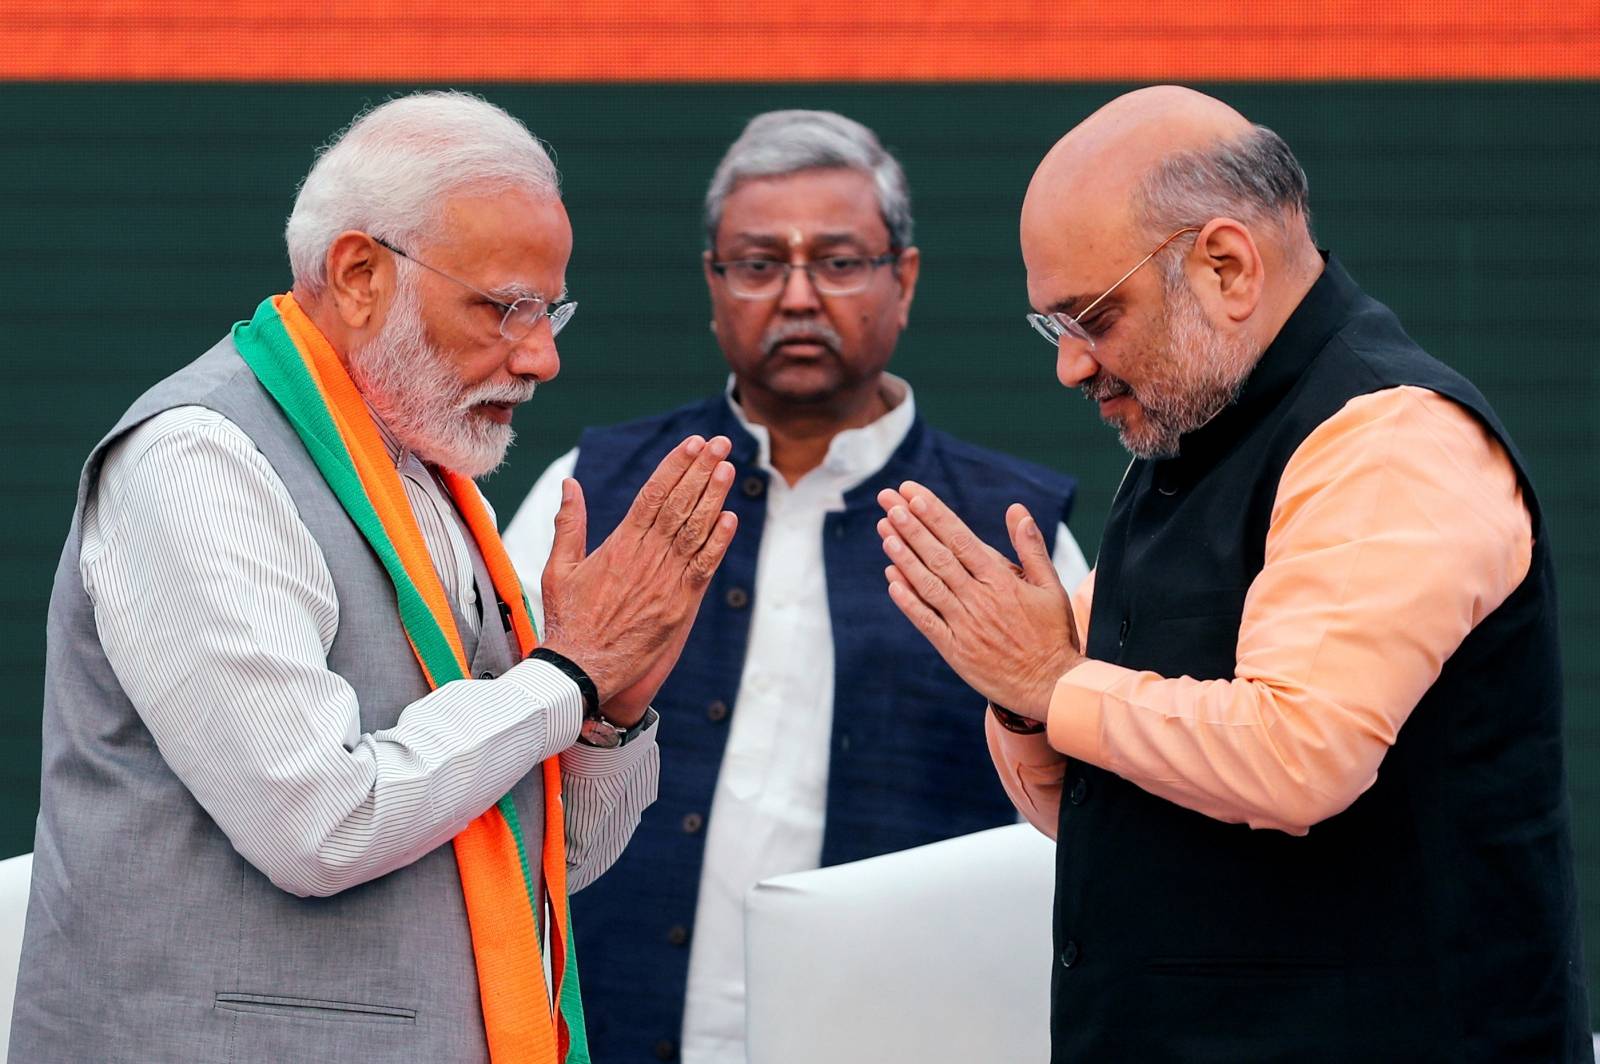 FILE PHOTO: Indian Prime Minister Narendra Modi and chief of India's ruling Bharatiya Janata Party (BJP) Amit Shah, greet each other before releasing their party's election manifesto for the April/May general election in New Delhi